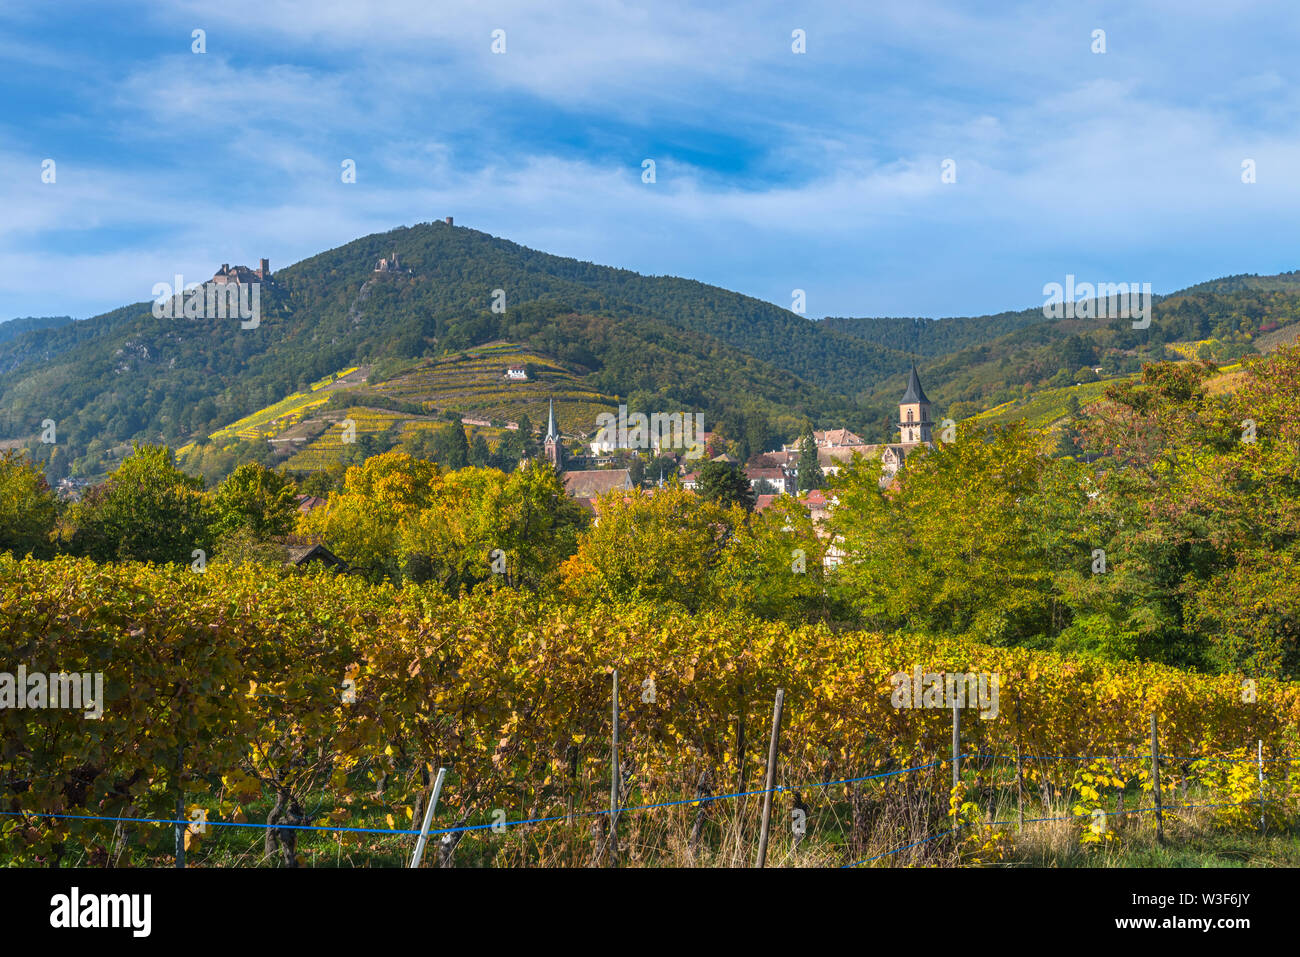 panorama of village Ribeauvillé with landscape, Alsace Wine Route, France, mountains with vineyards and castles in the background Stock Photo